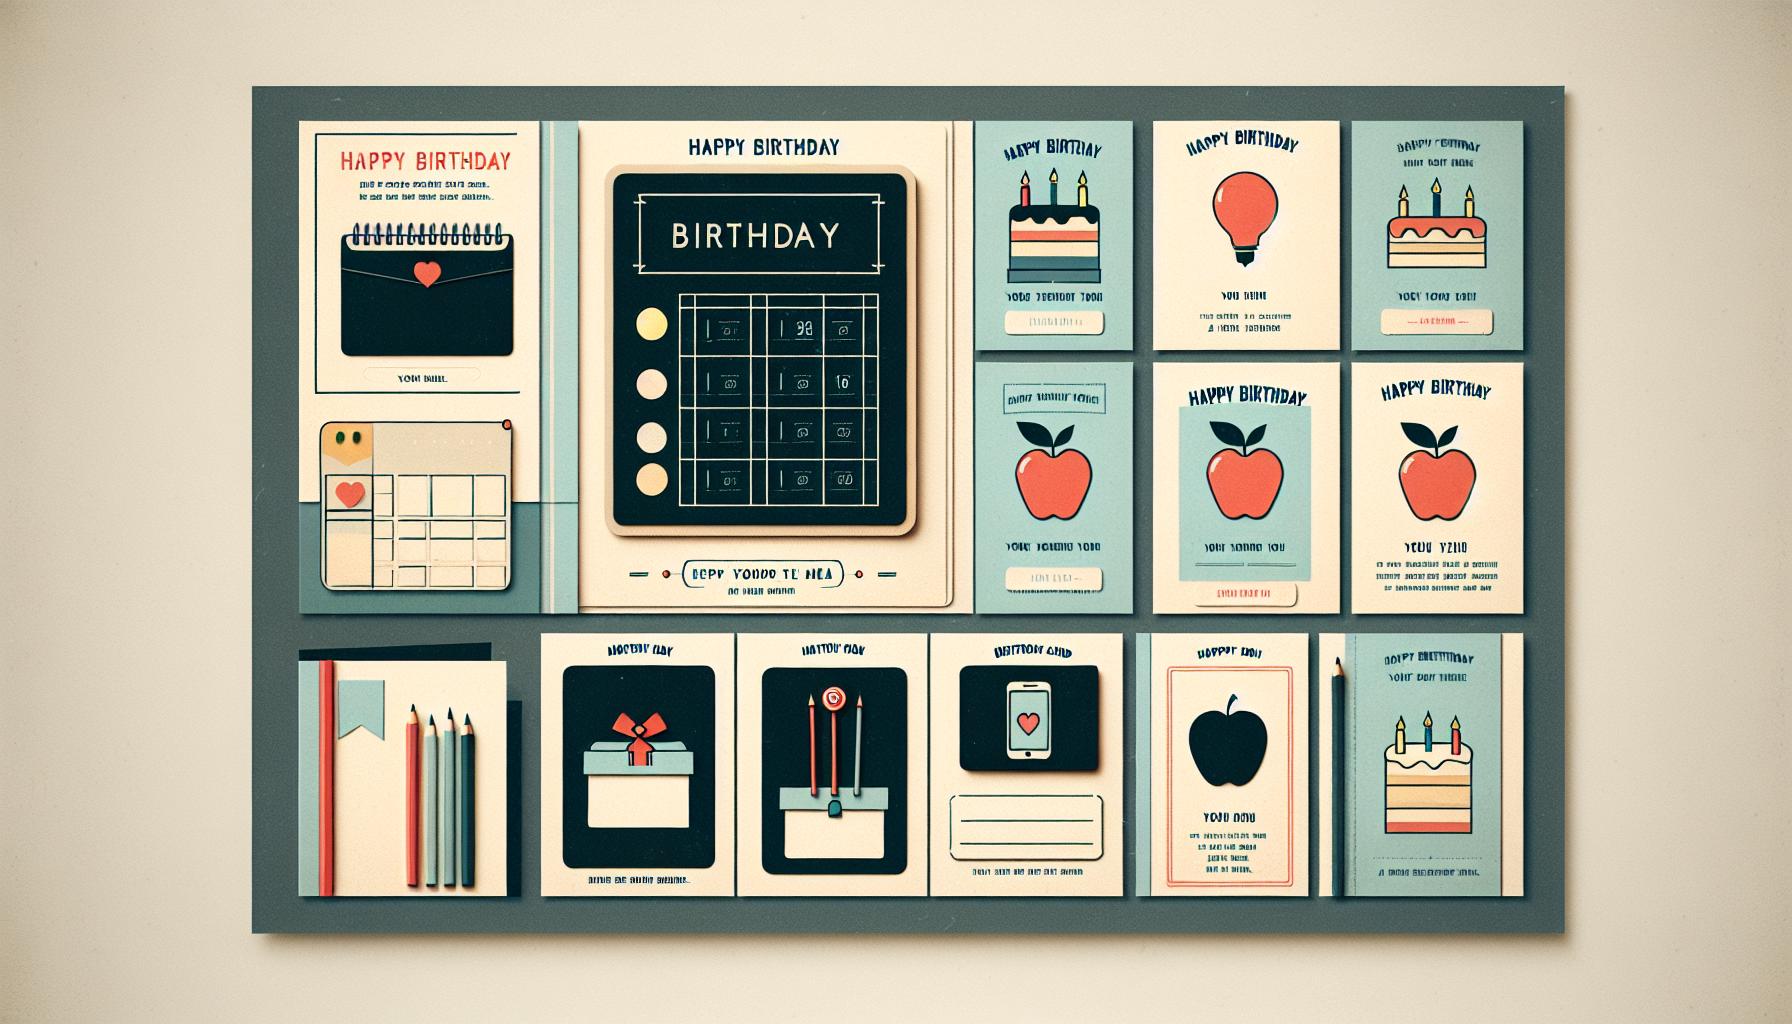 Creating Unforgettable Birthday Cards & Celebrations for Teachers: A Comprehensive Guide